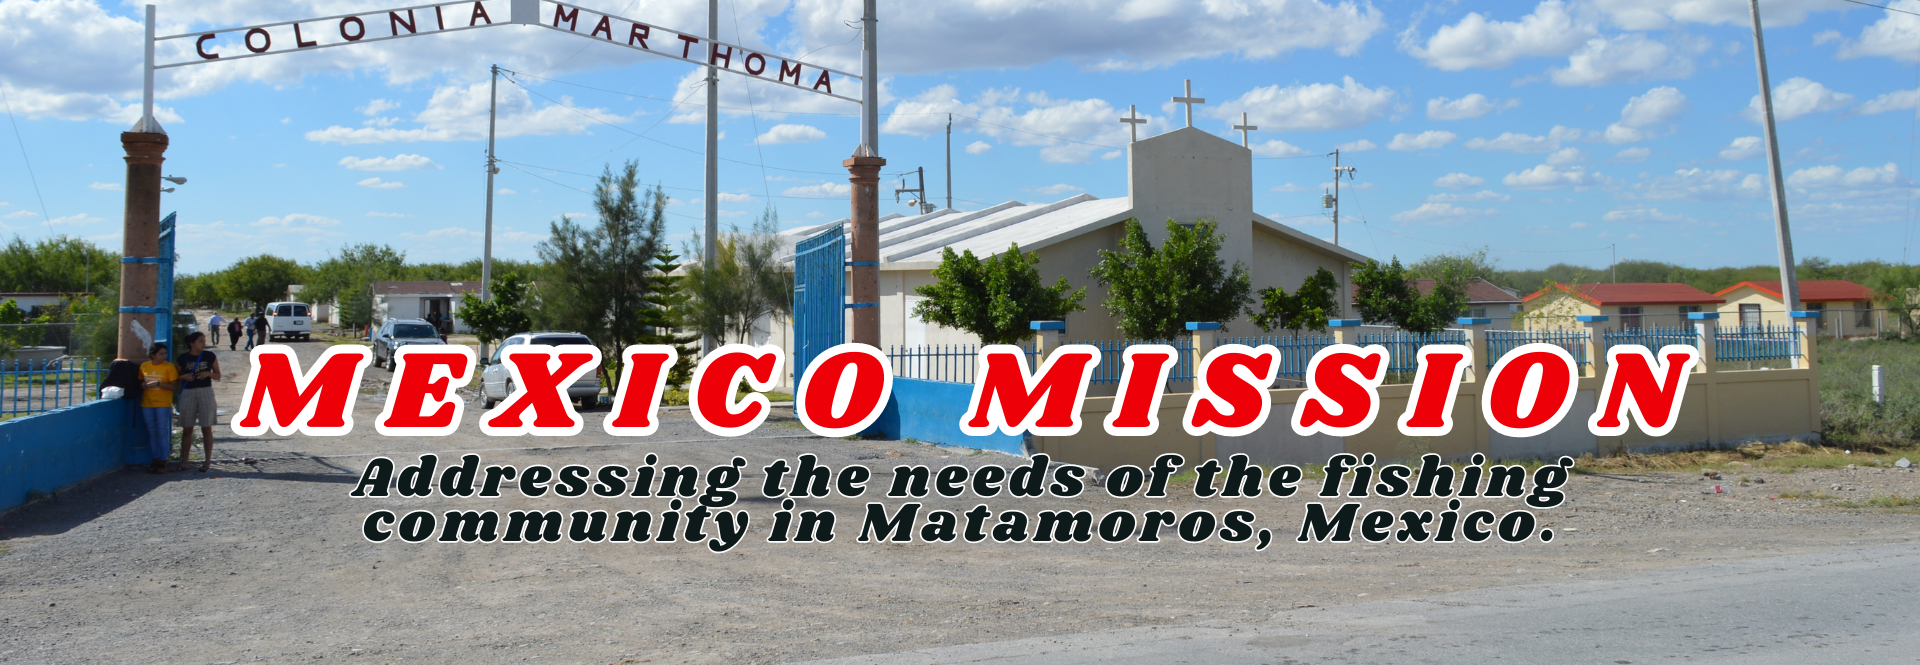 Mexico Mission